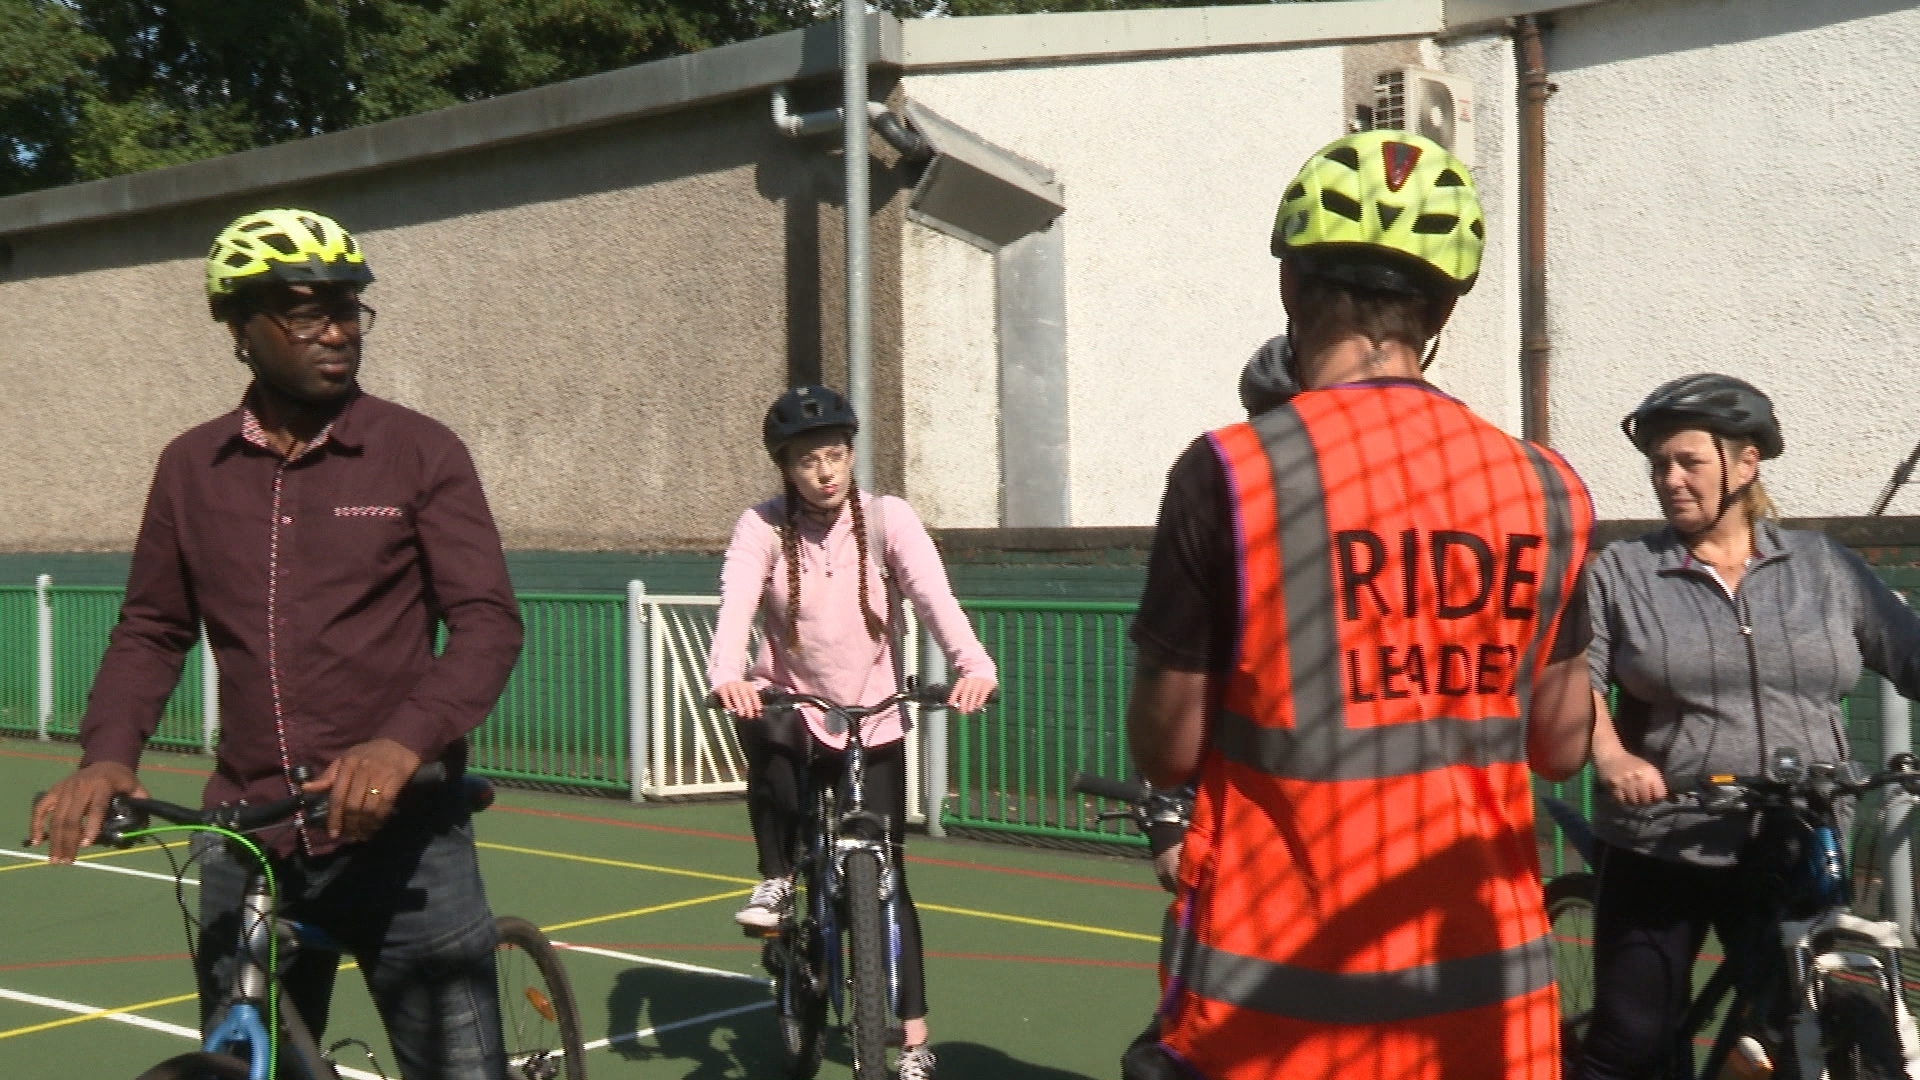 Cycling classes have been popular at Drumchapel community sports hub.